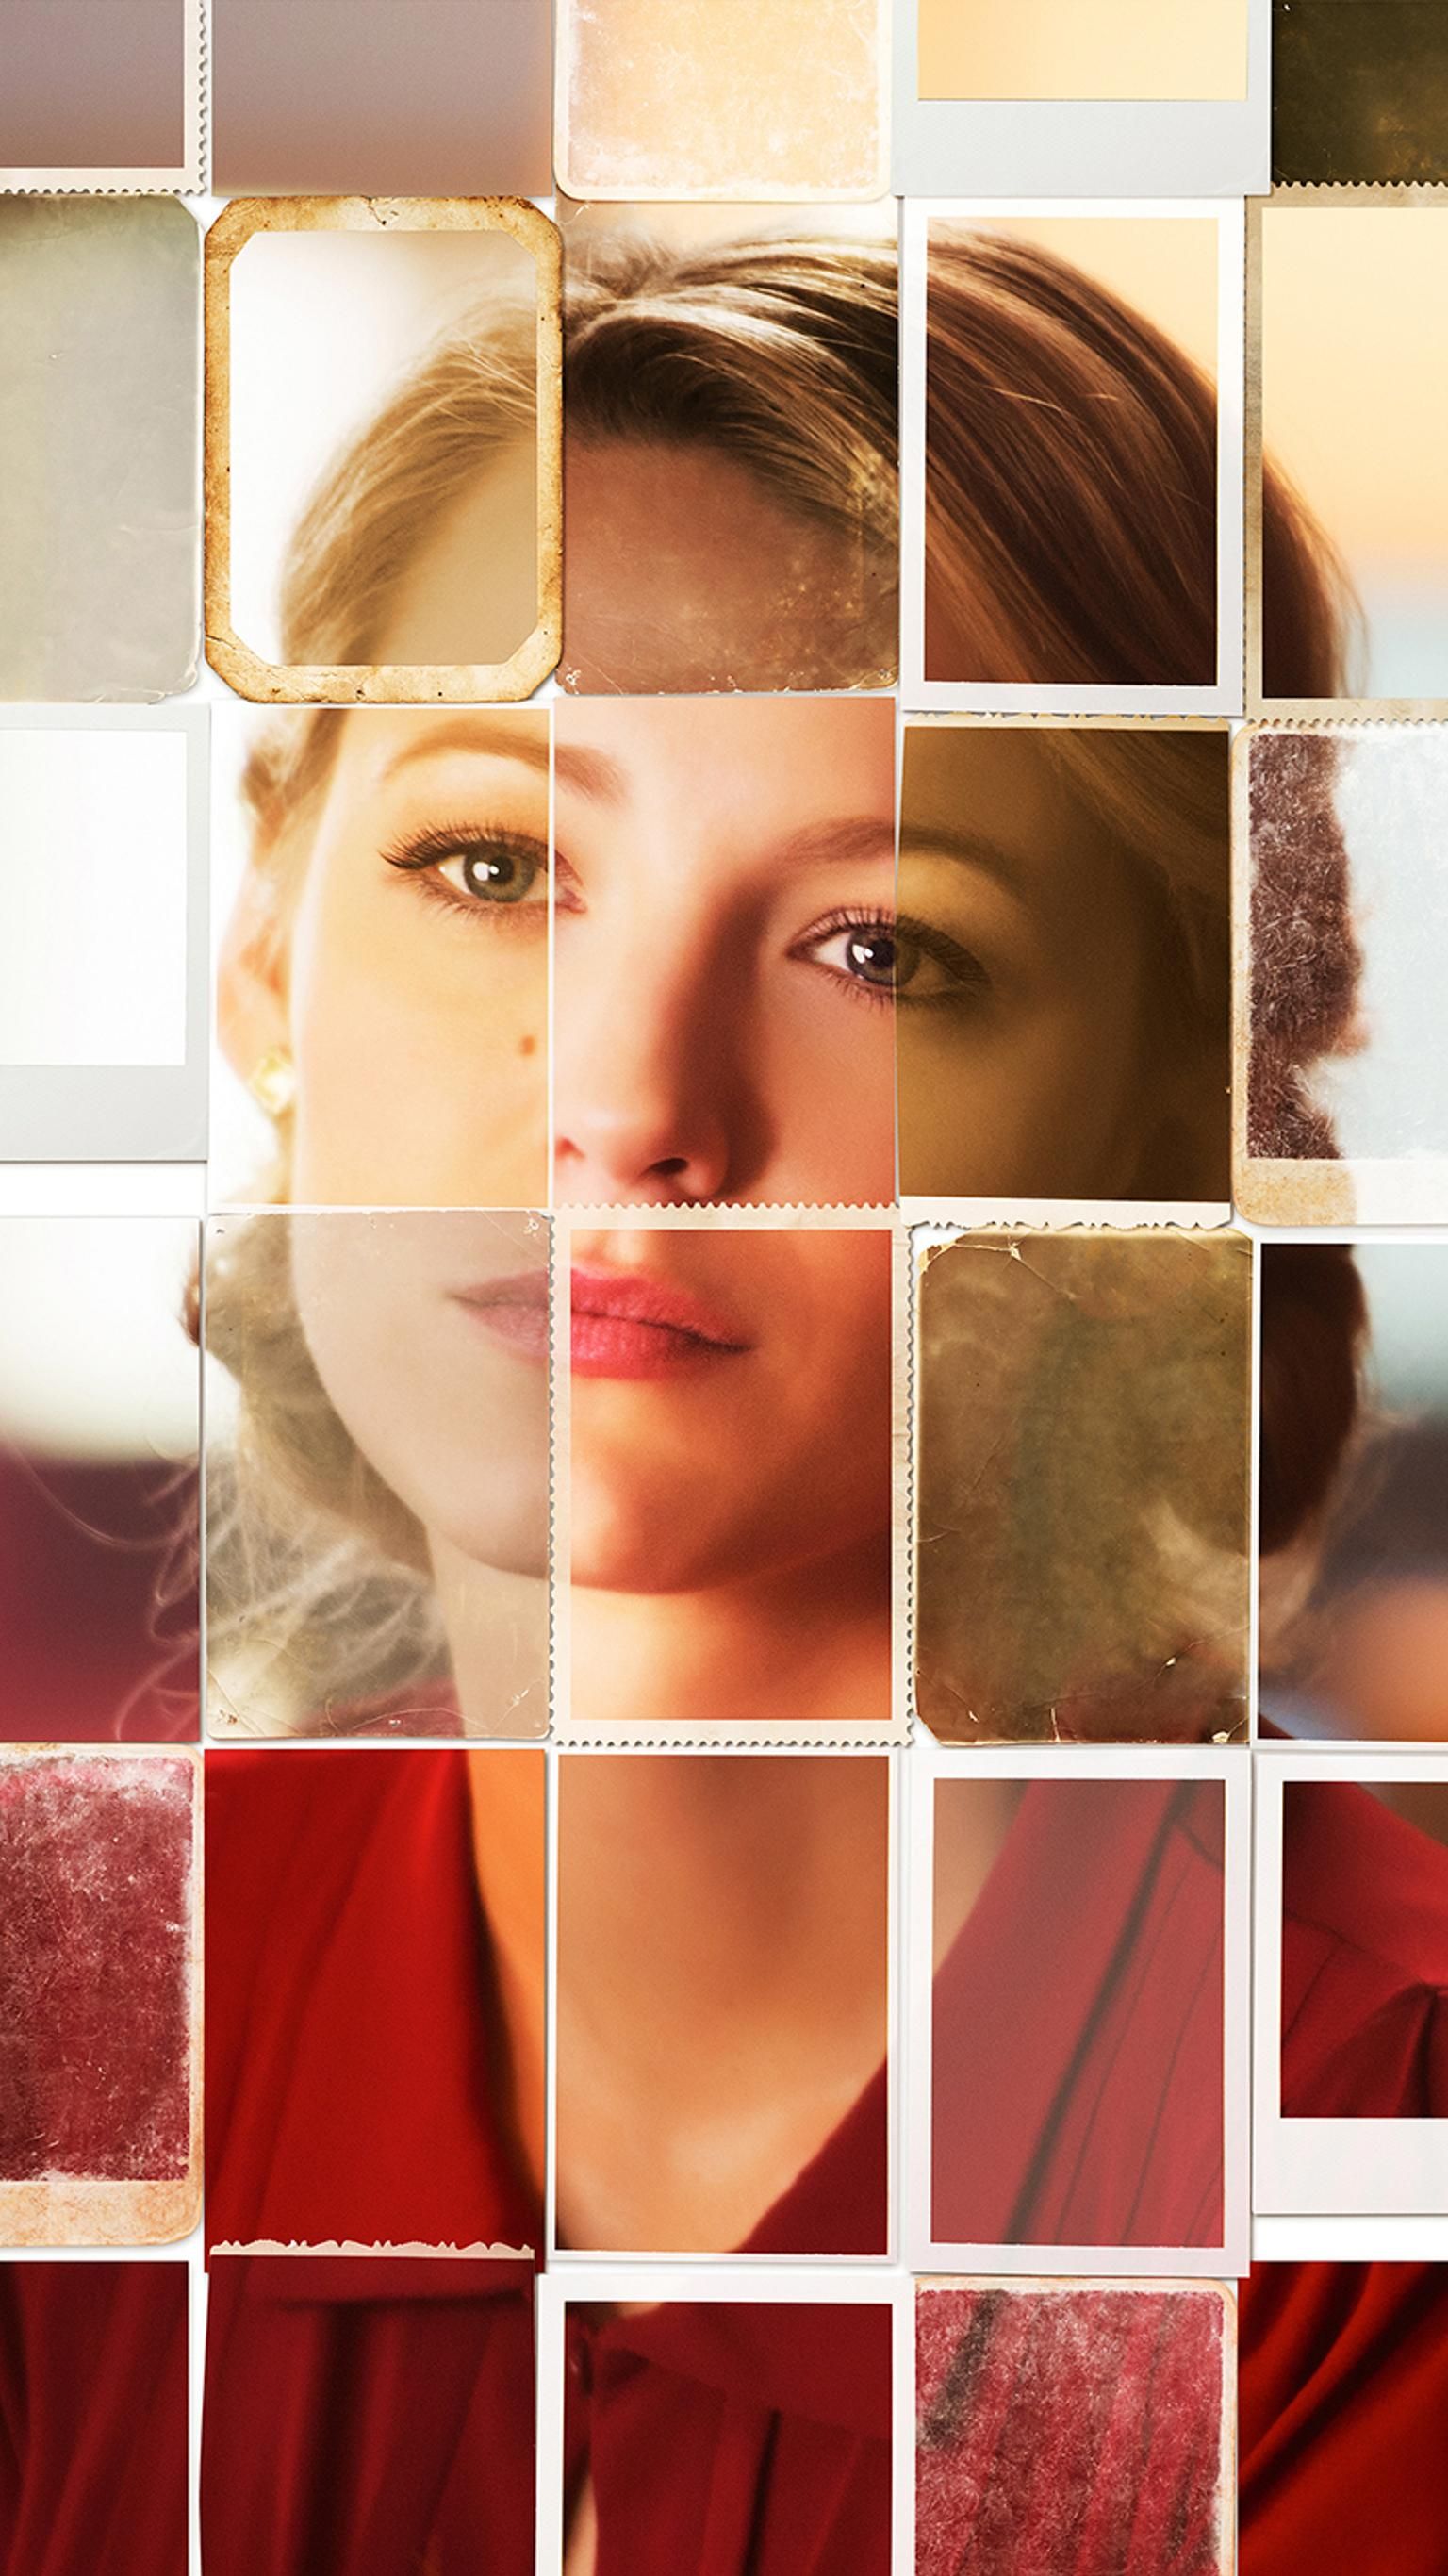 The Age Of Adaline Wallpapers